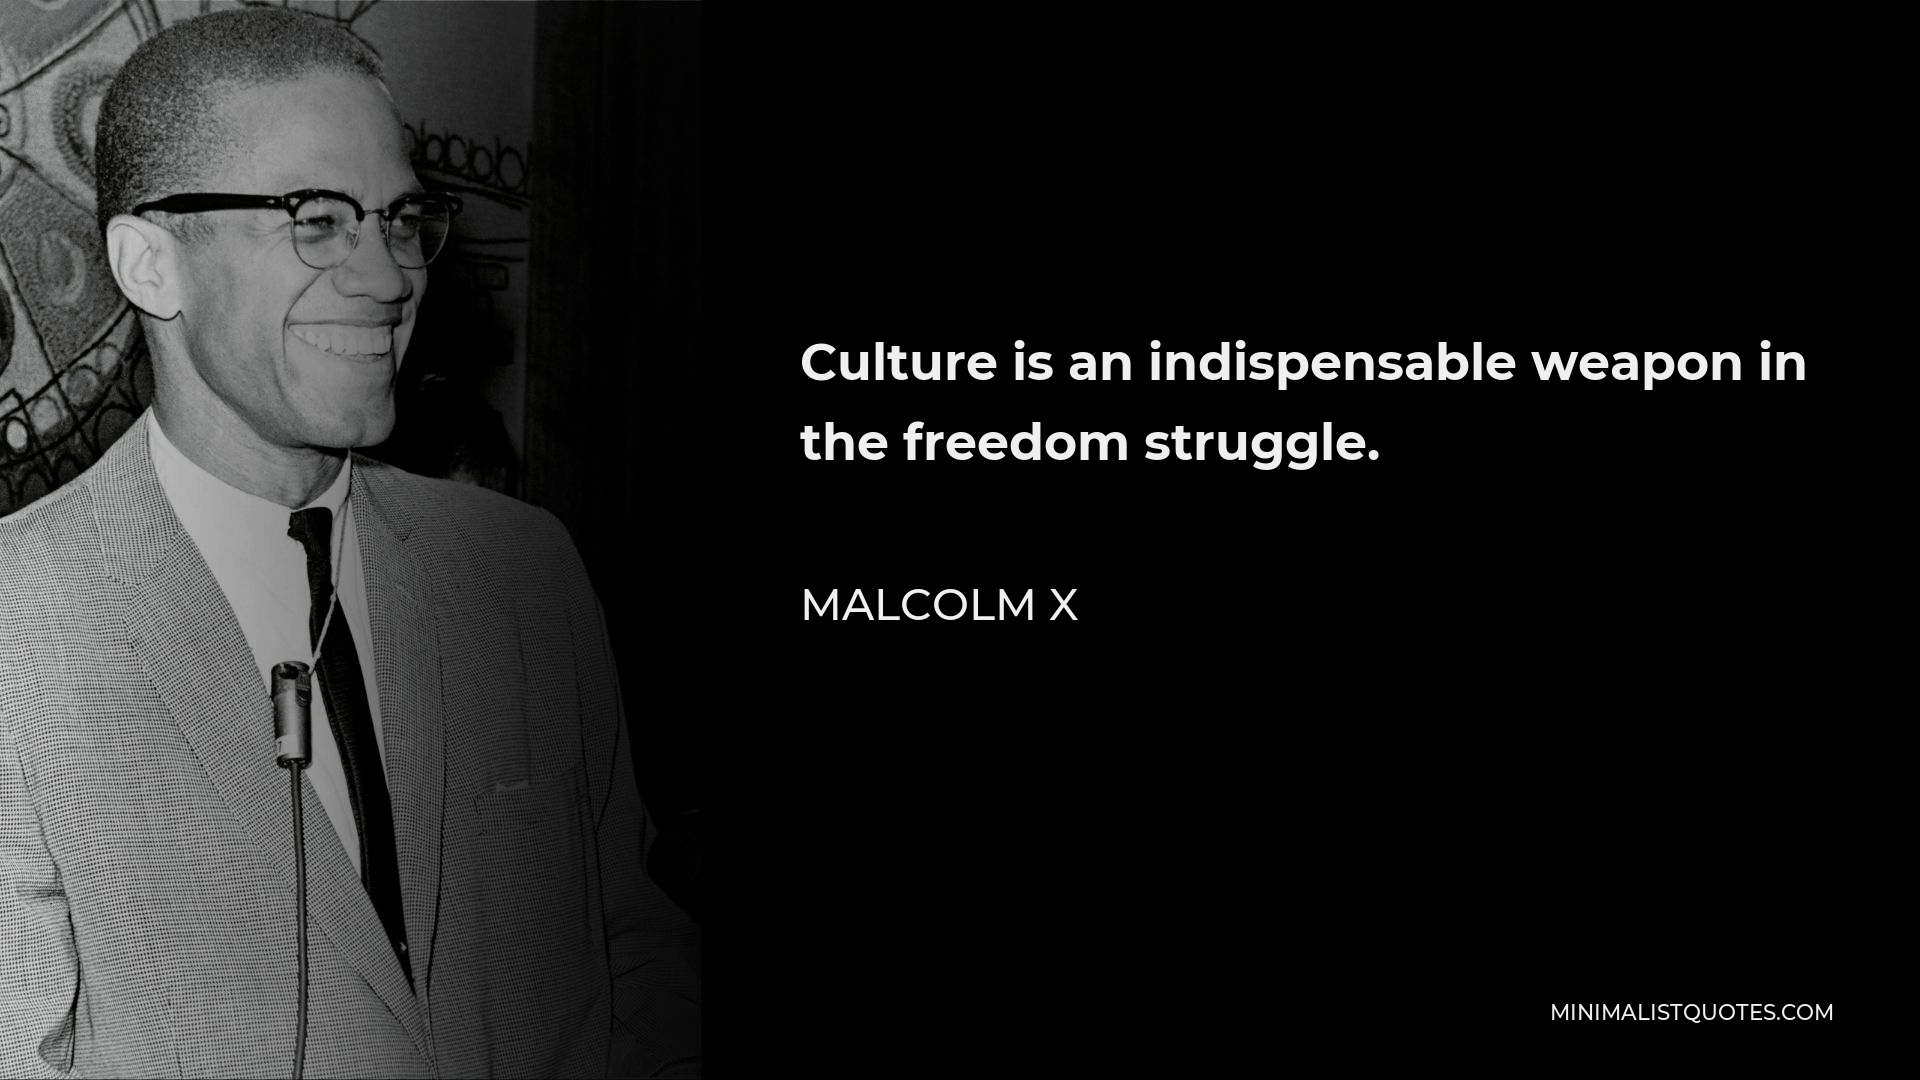 Malcolm X Quote - Culture is an indispensable weapon in the freedom struggle.